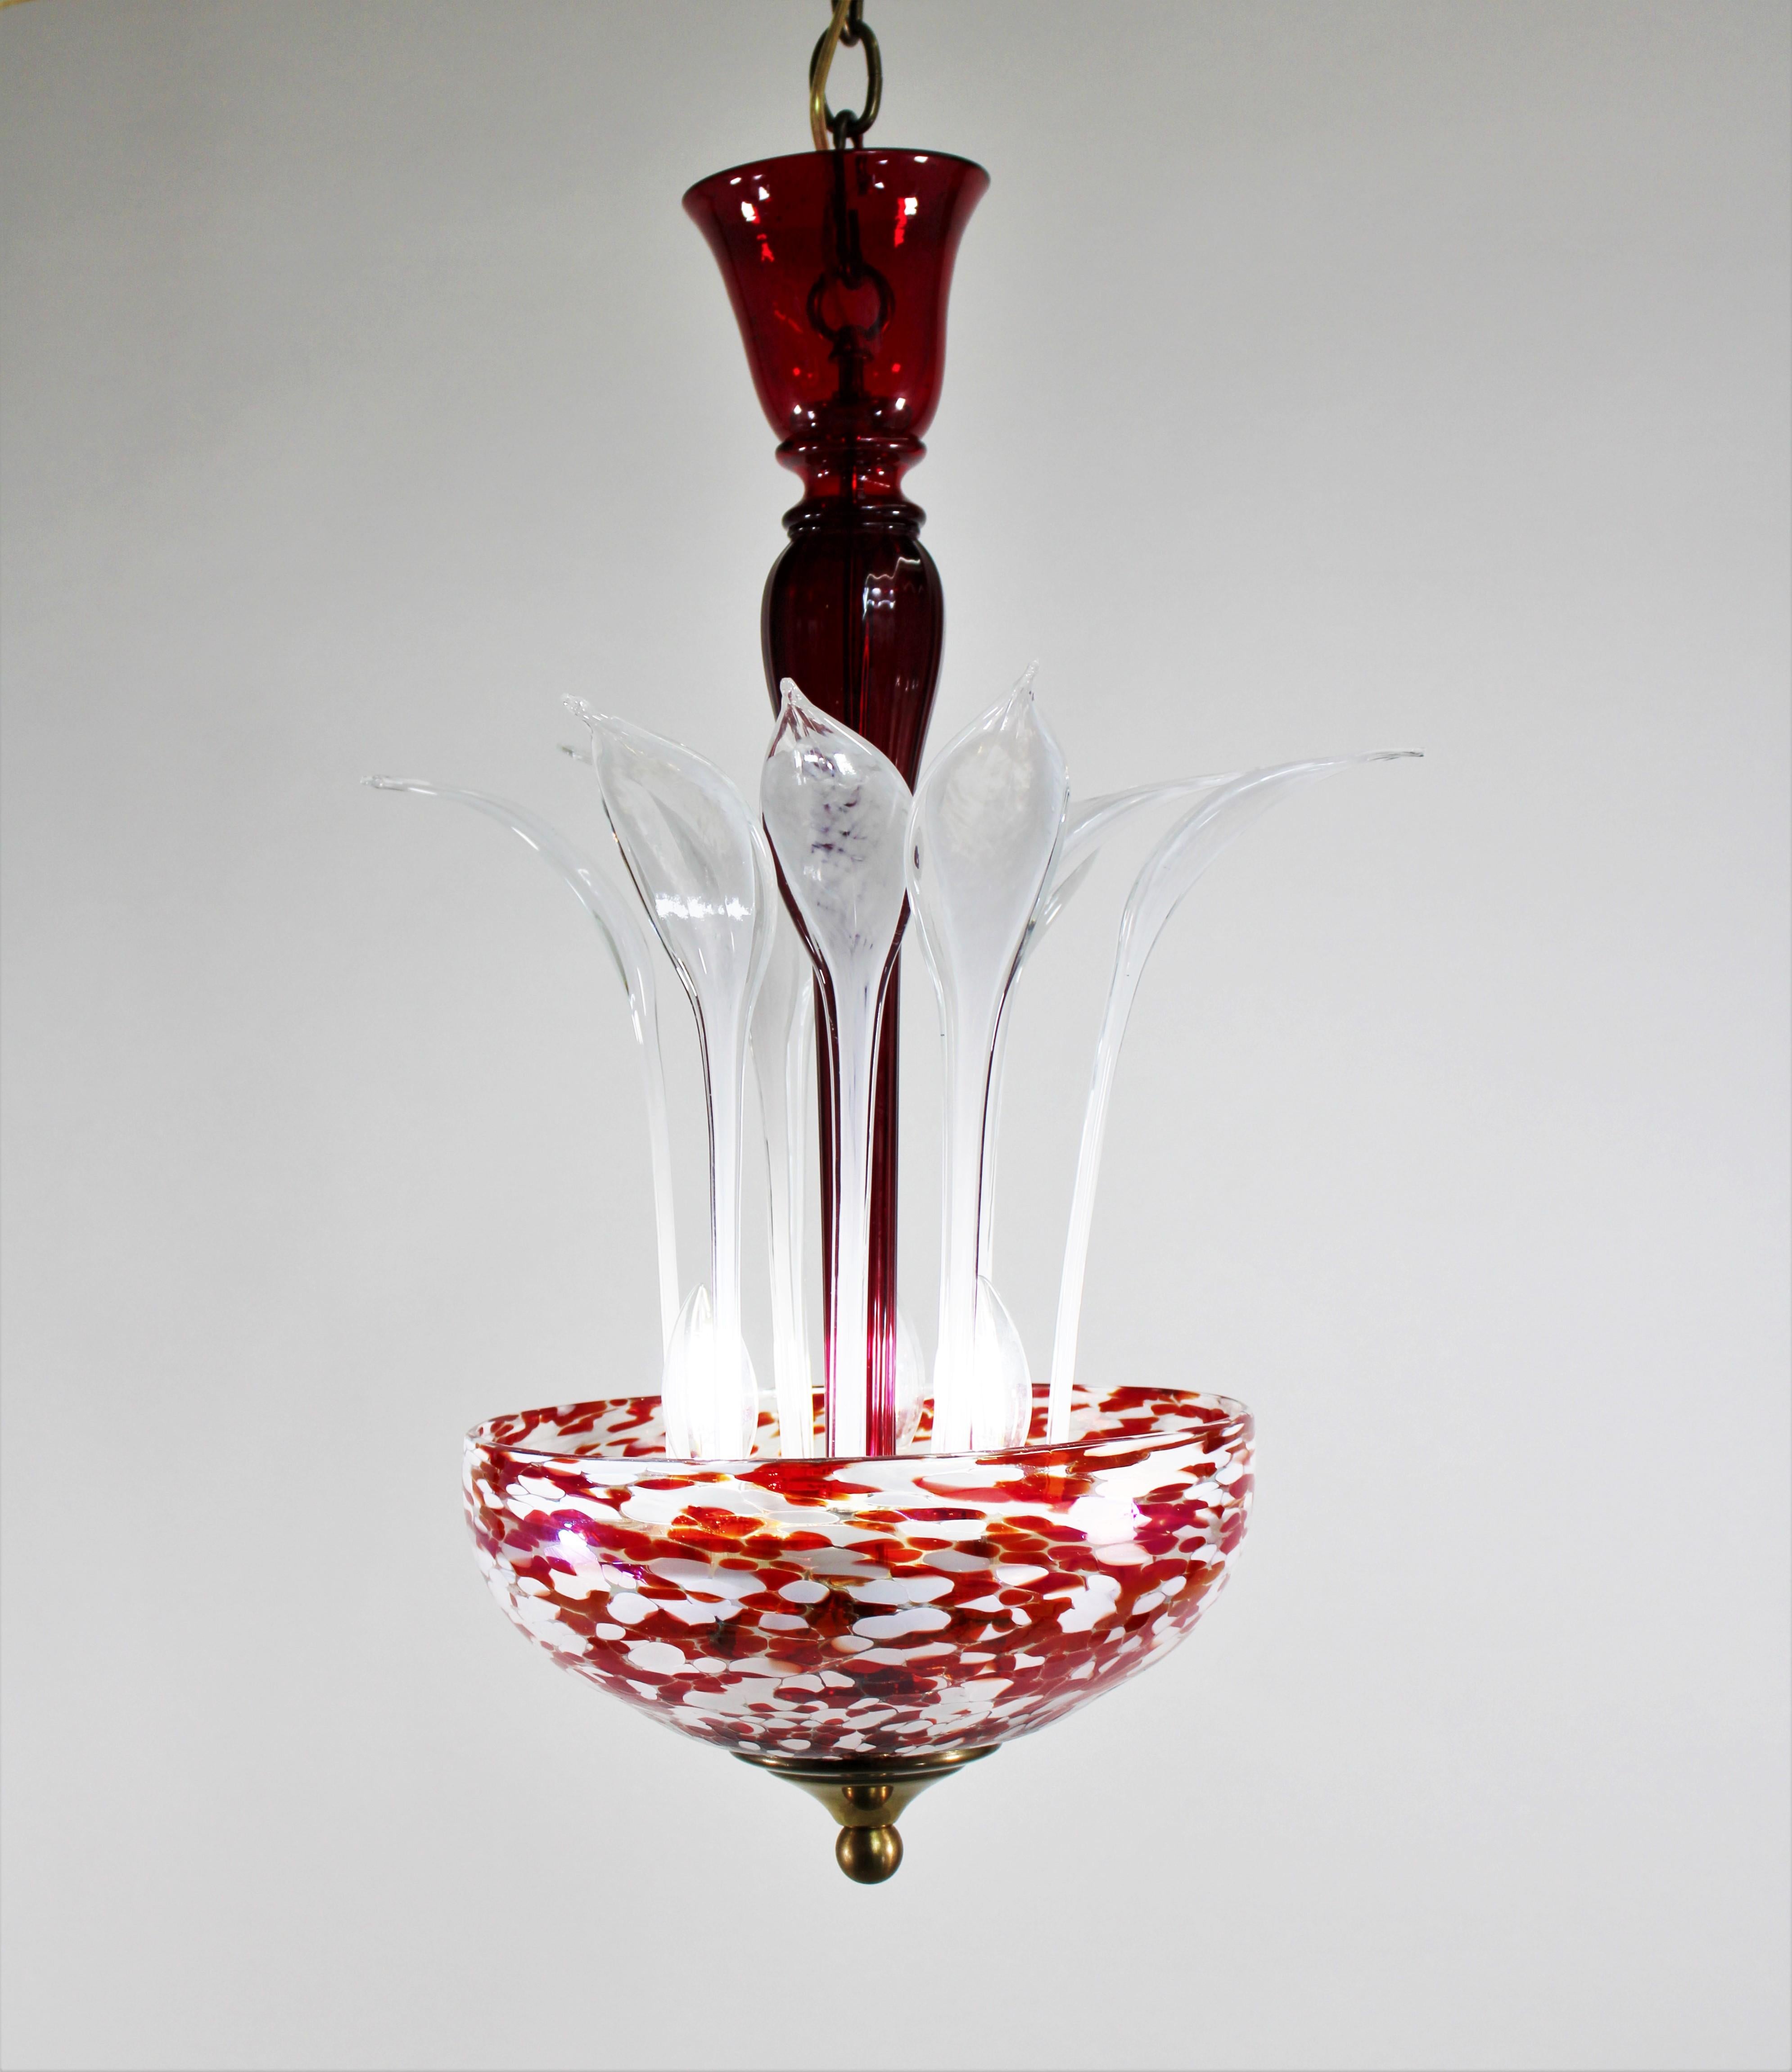 This stunning and unusual modern two-toned Murano ceiling lamp is adorned with beautiful white frond elements, a scarlet red bulbous center column, and a brass finial. The prominent light bowl is speckled with red and white spots formed by rolling